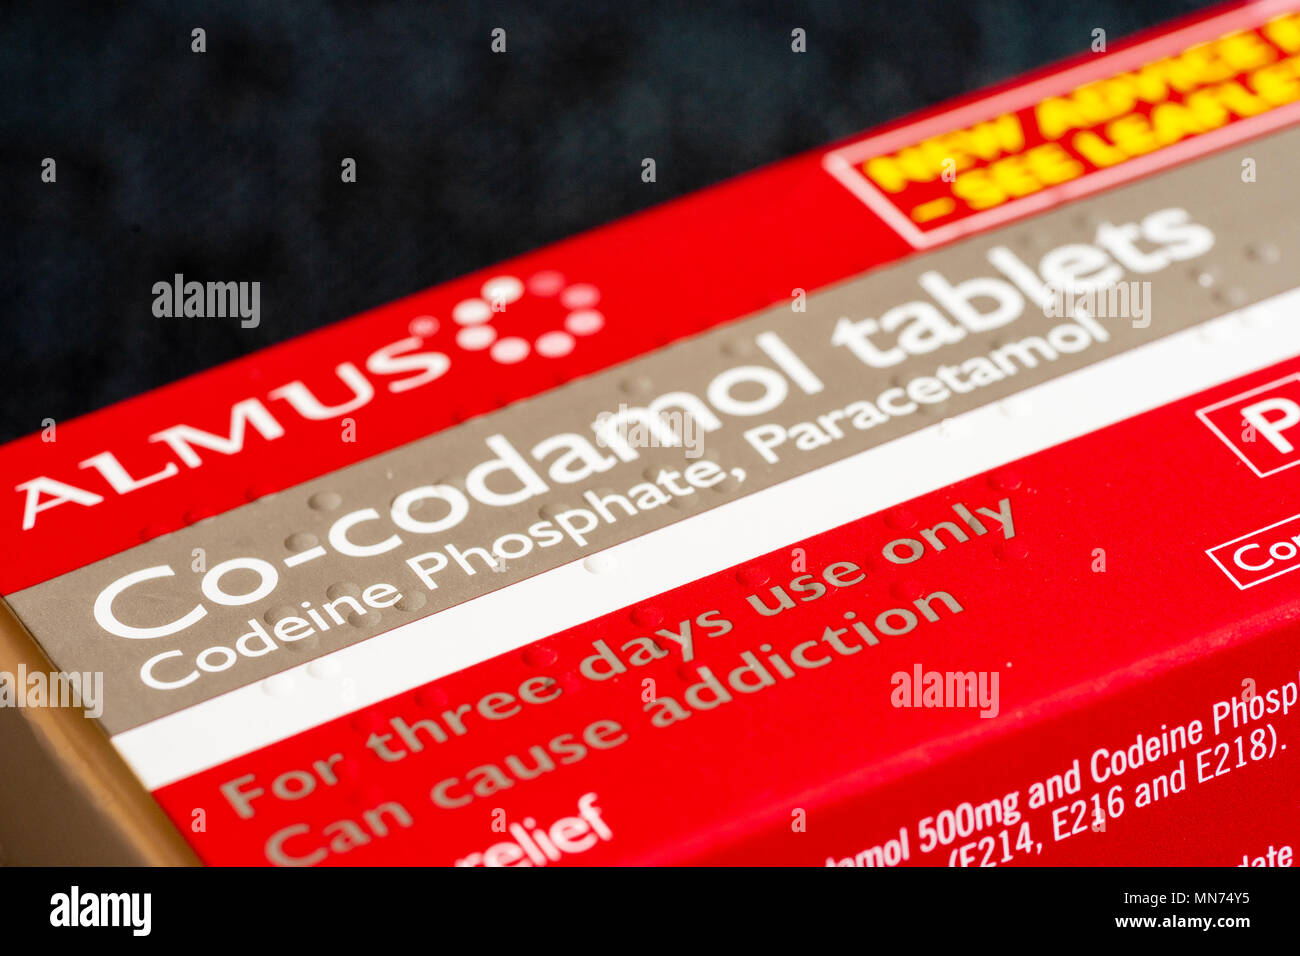 Close up of a red packet of Co-codamol tablets, over the counter tablets/ medication containing codeine and paracetamol, UK, 2018 Stock Photo